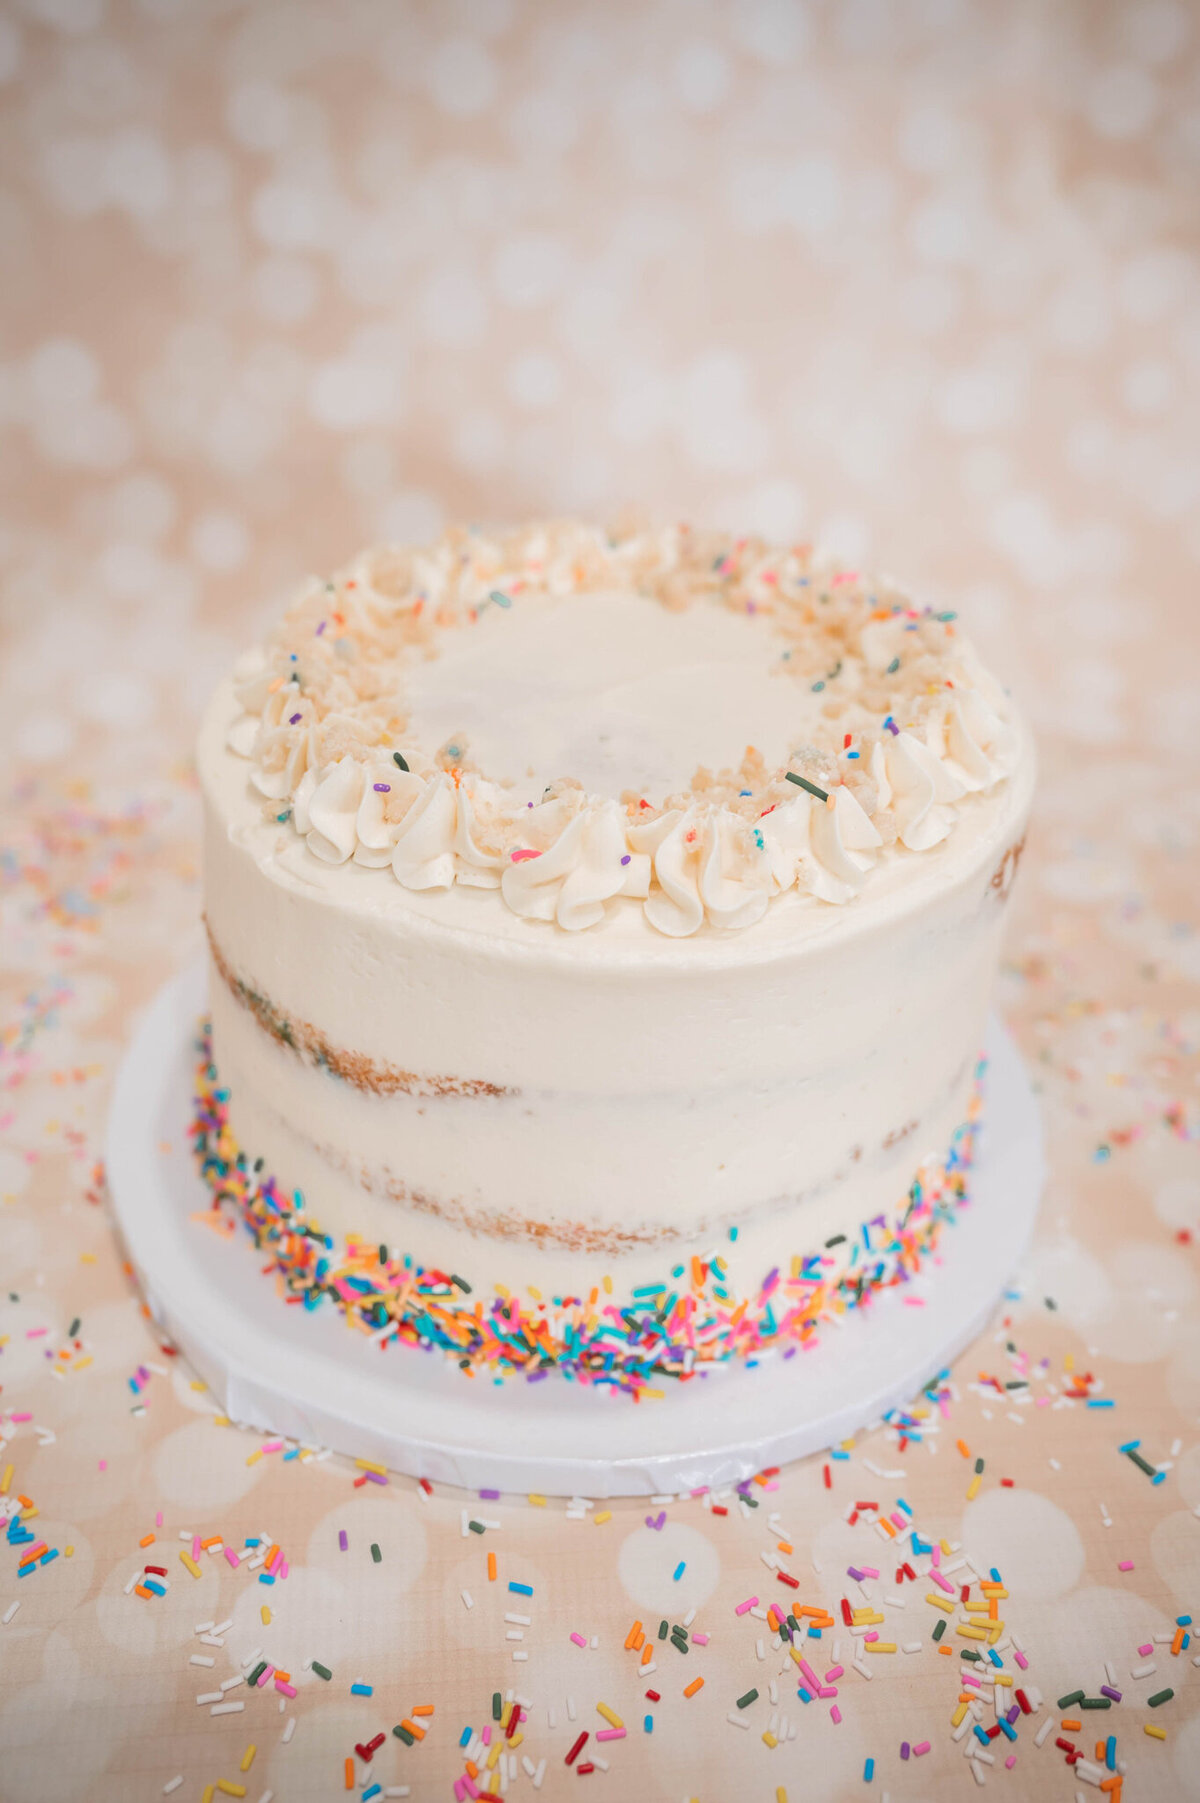 Confetti  cake by Sweets By Sue in Lethbridge, Alberta, featured on the Brontë Bride Vendor Guide.